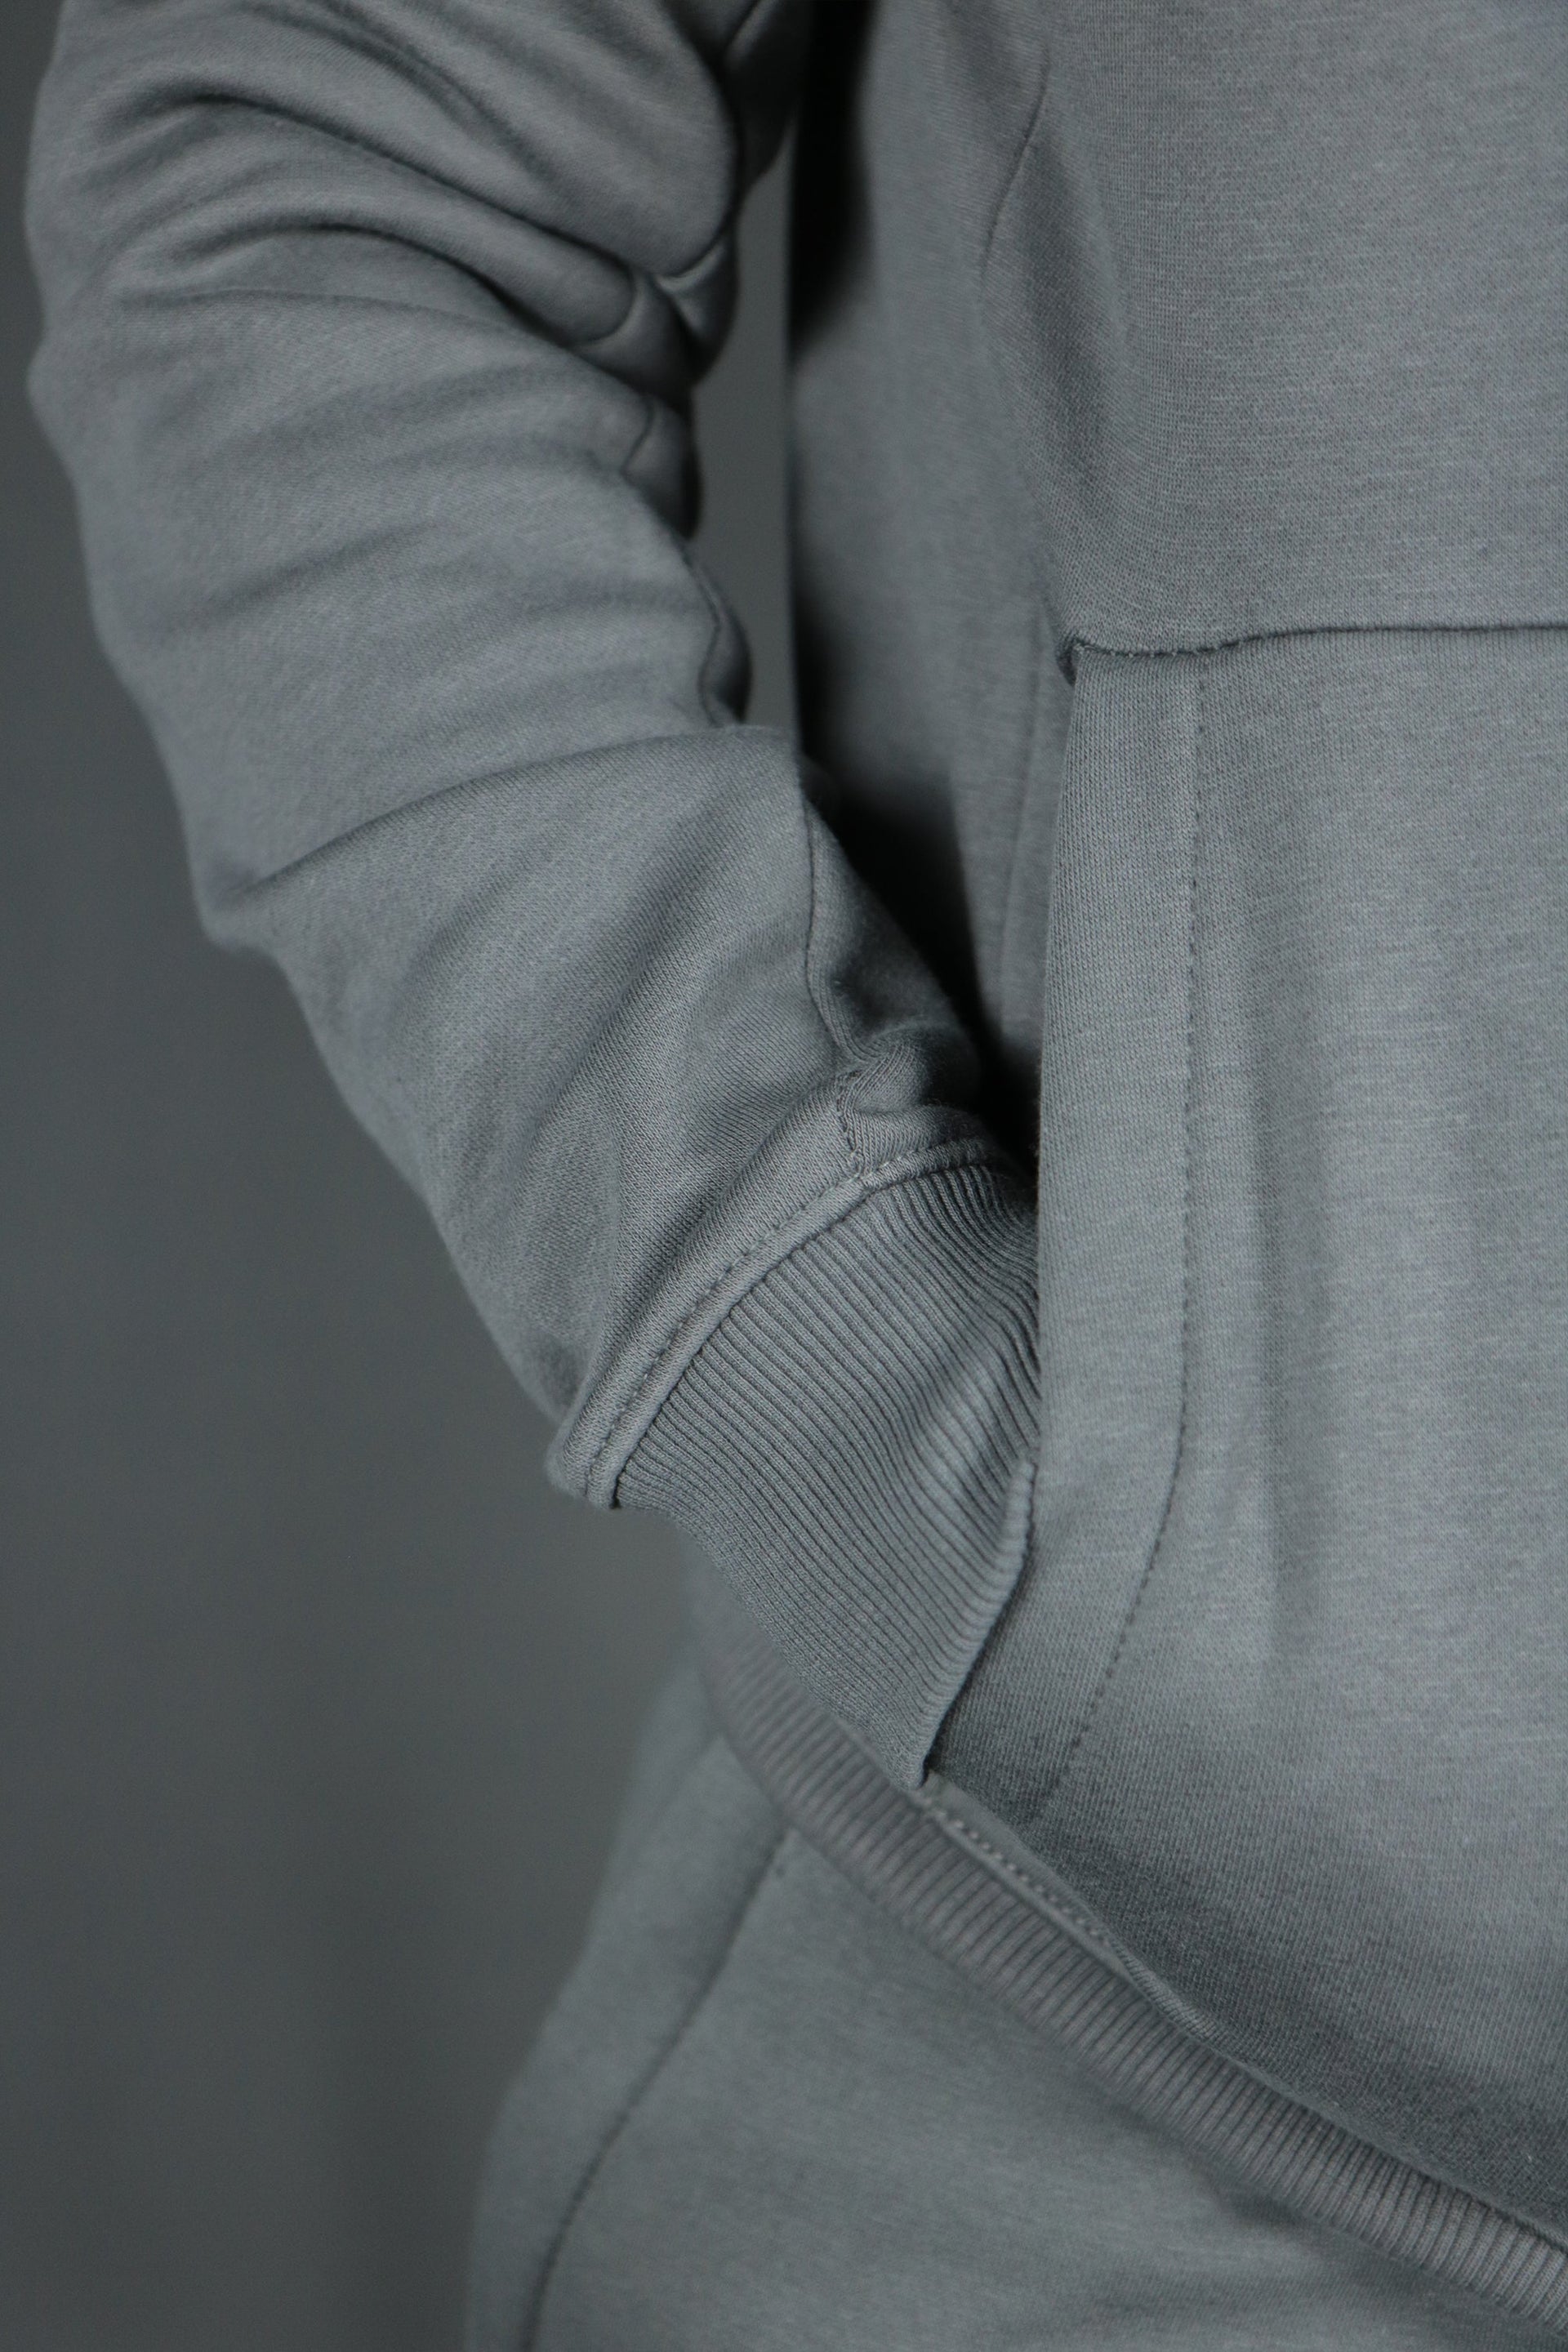 One of the two pockets of the charcoal basic tech fleece hoodie by Jordan Craig.